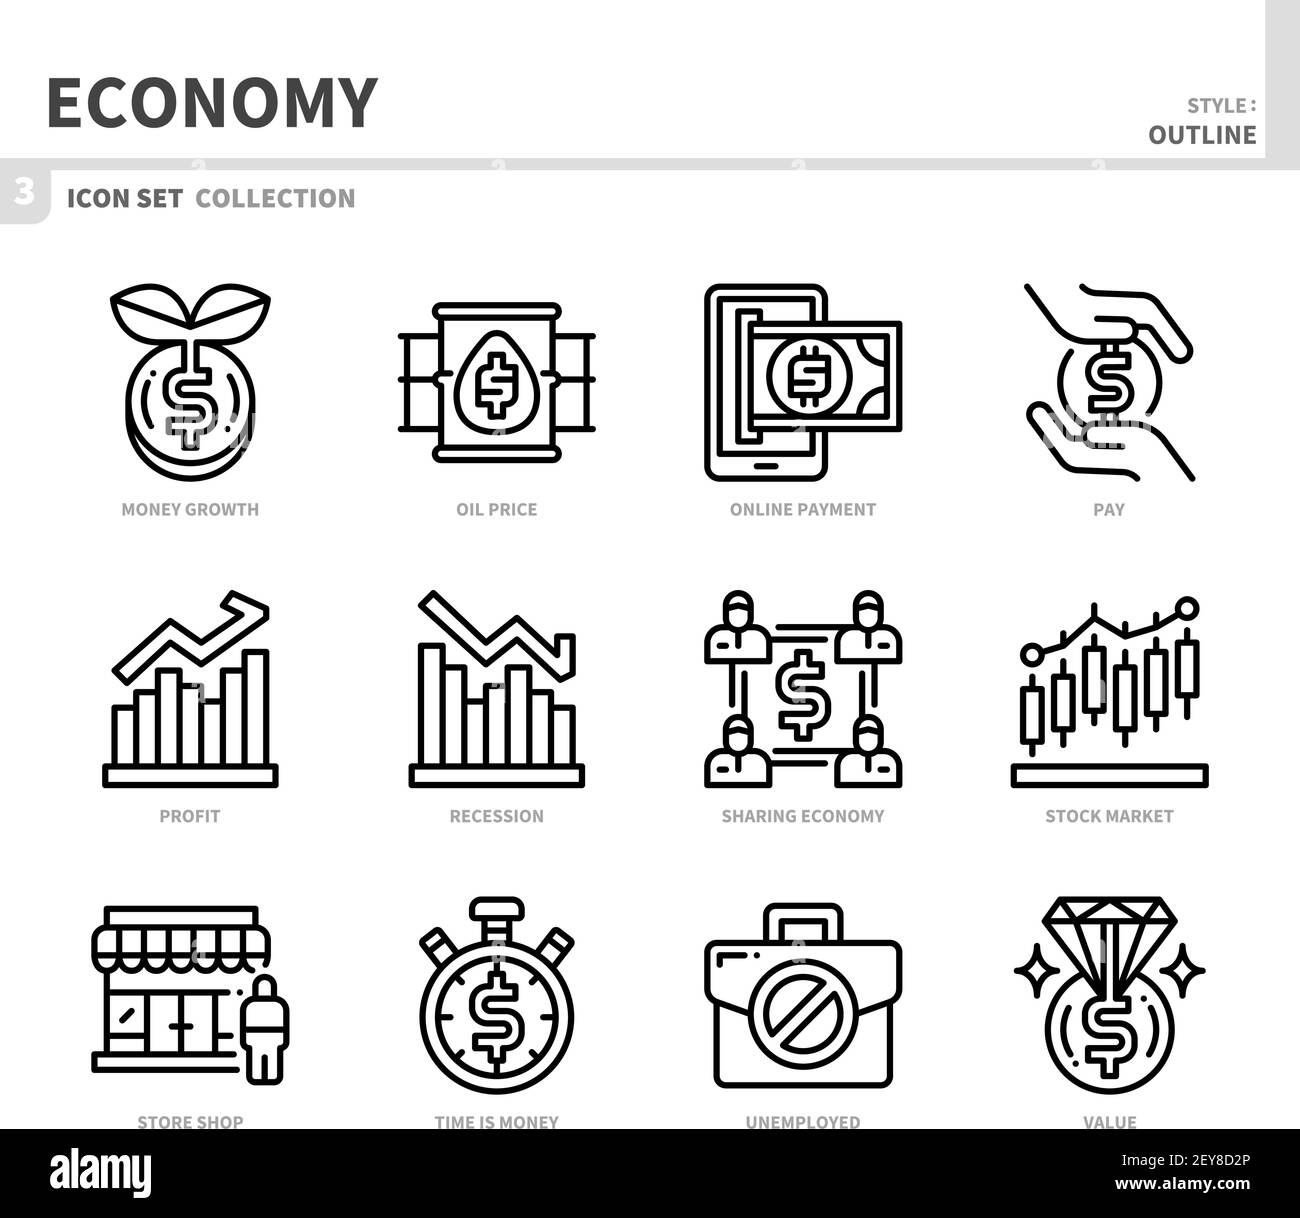 economy icon set,outline style,vector and illustration Stock Vector